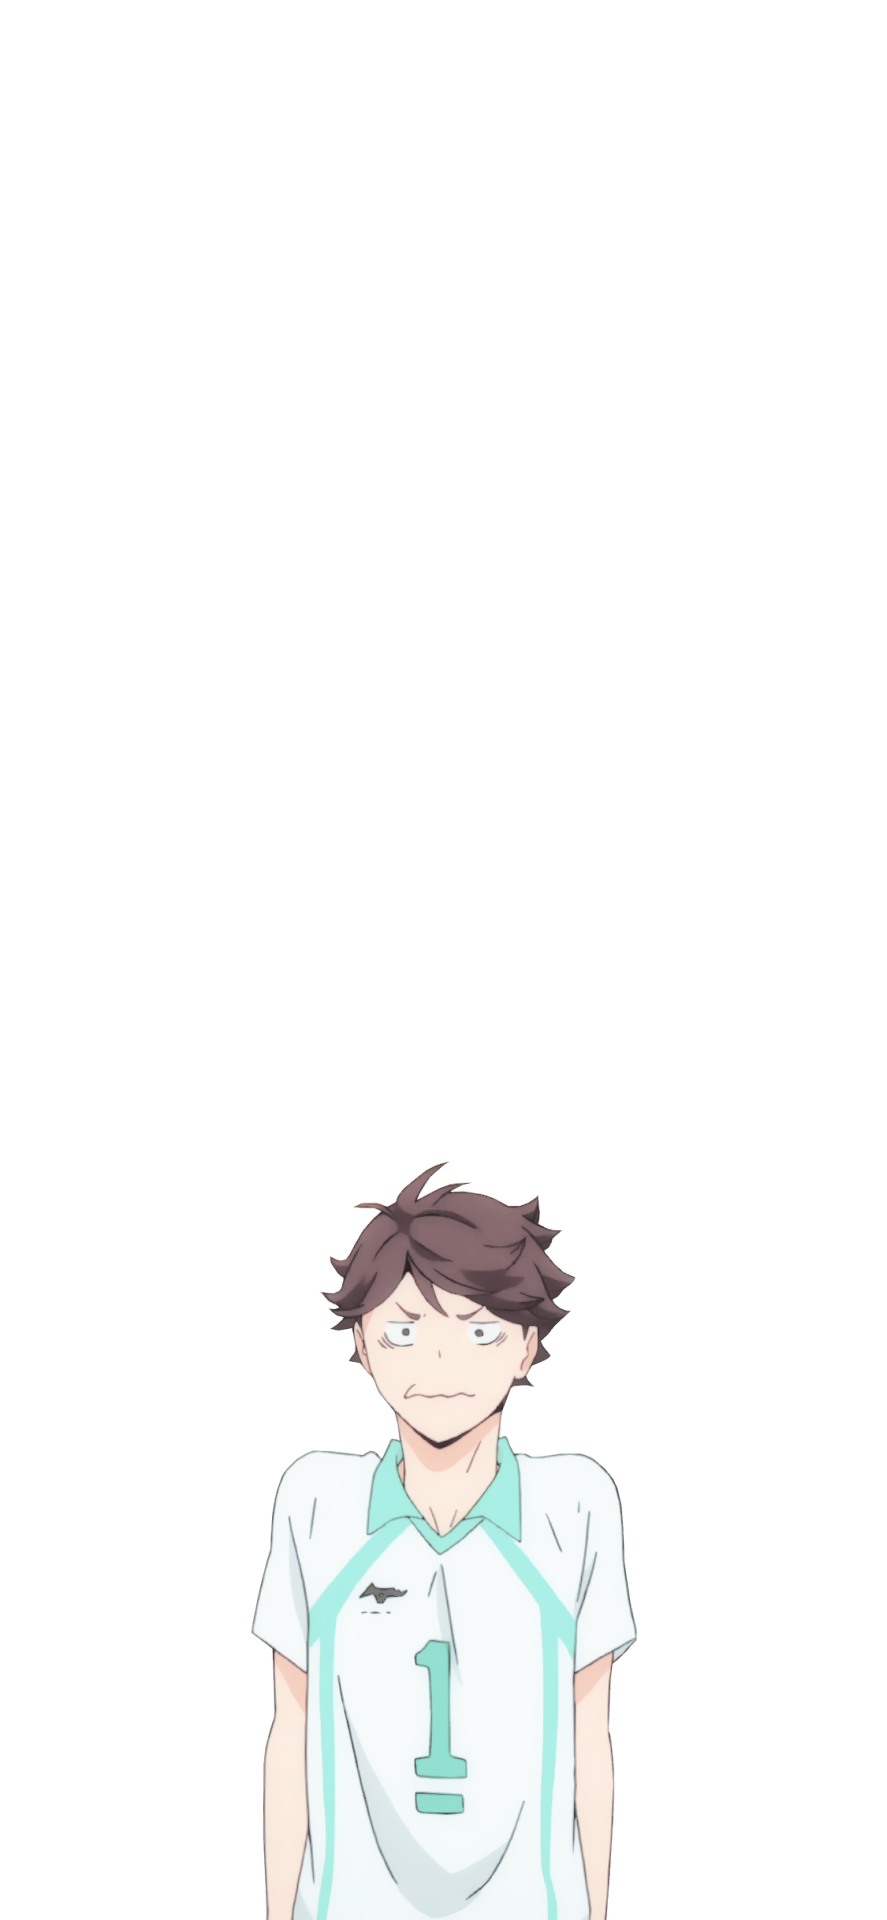 oikawa aesthetic wallpapers wallpaper cave on oikawa aesthetic wallpapers